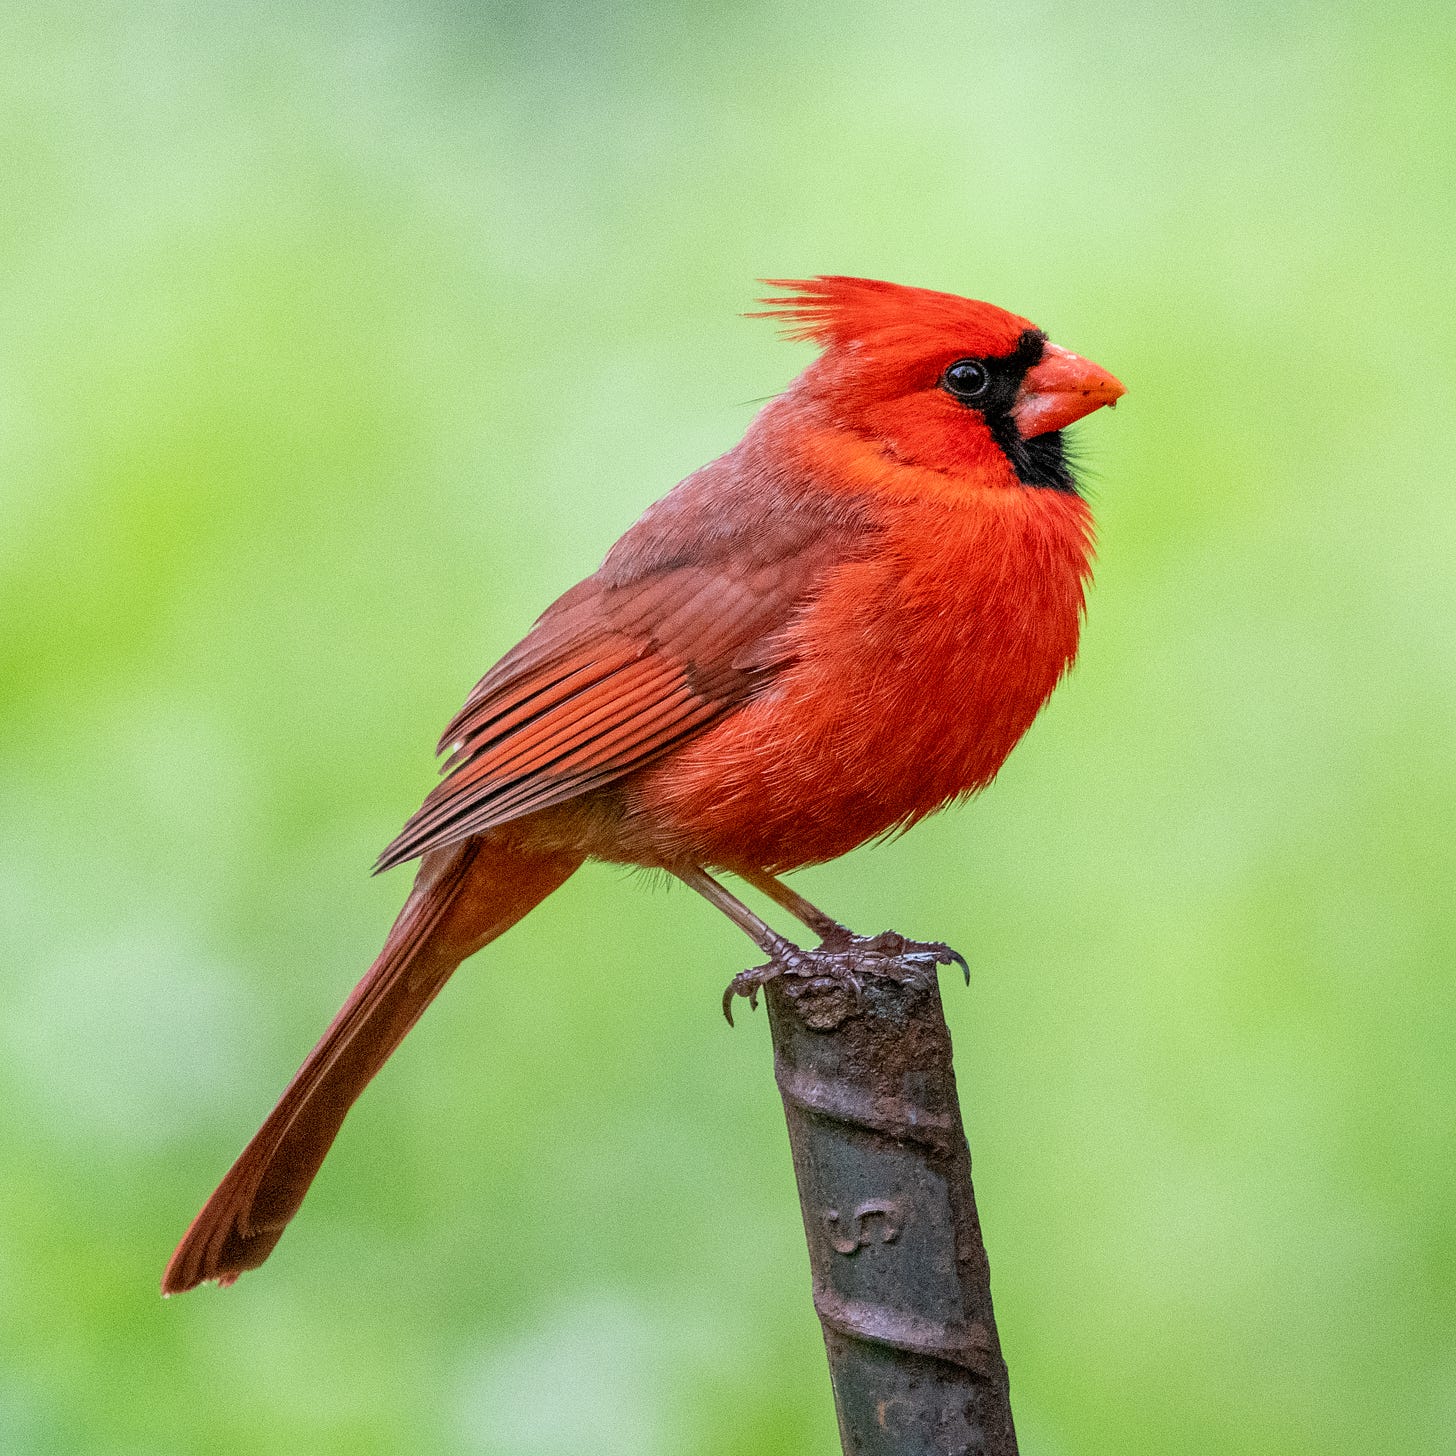 A male Northern cardinal is perched on a steel fence stake